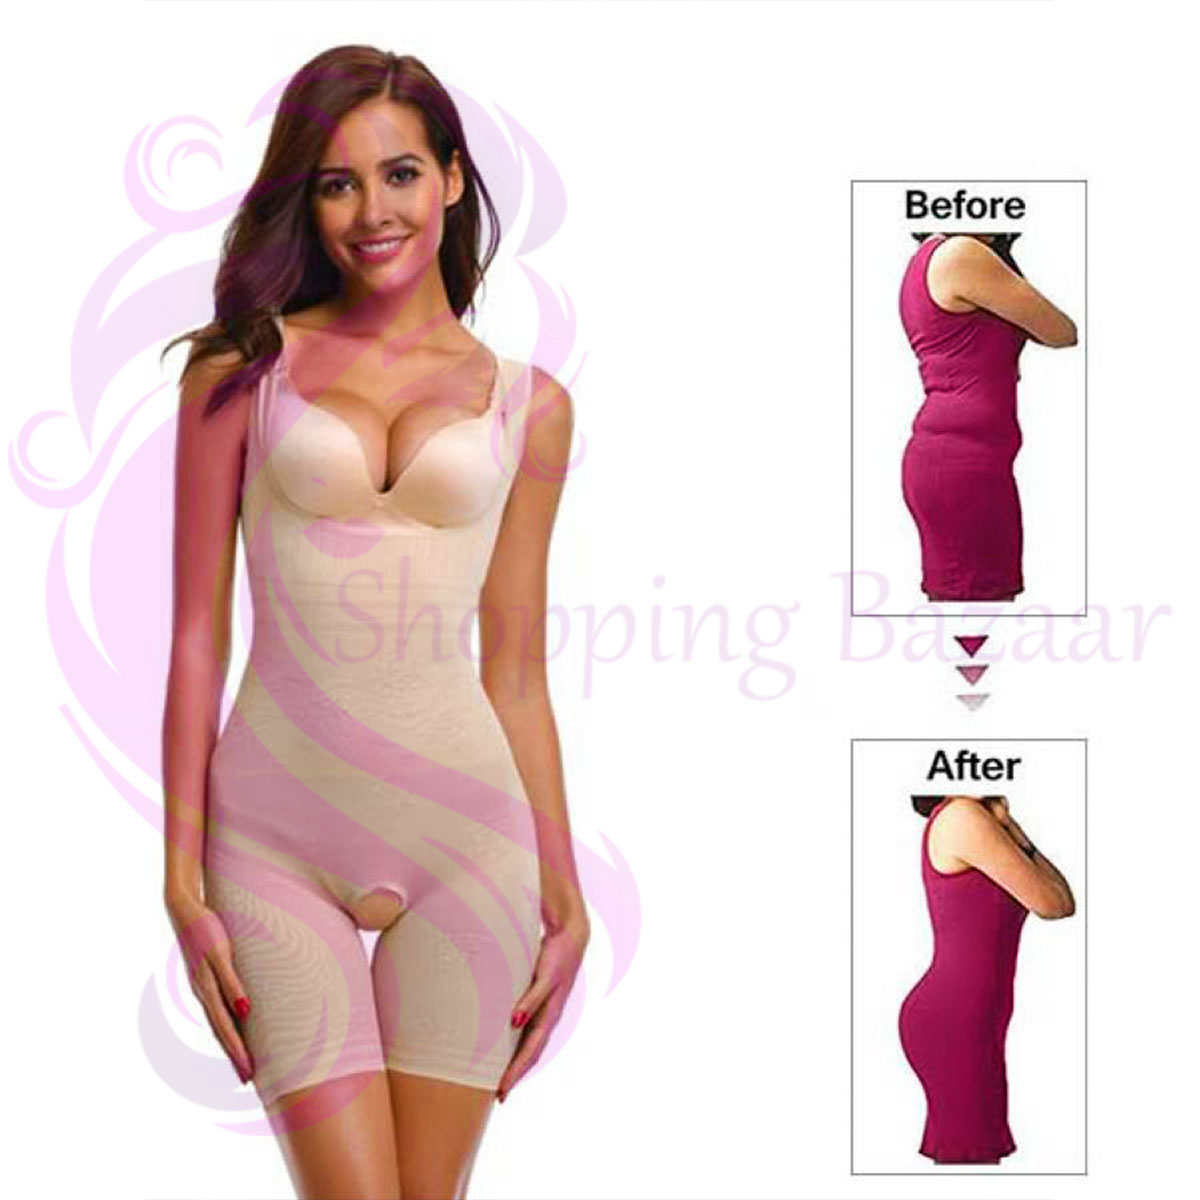 ifg body shaper price in pakistan Archives - OwnShop